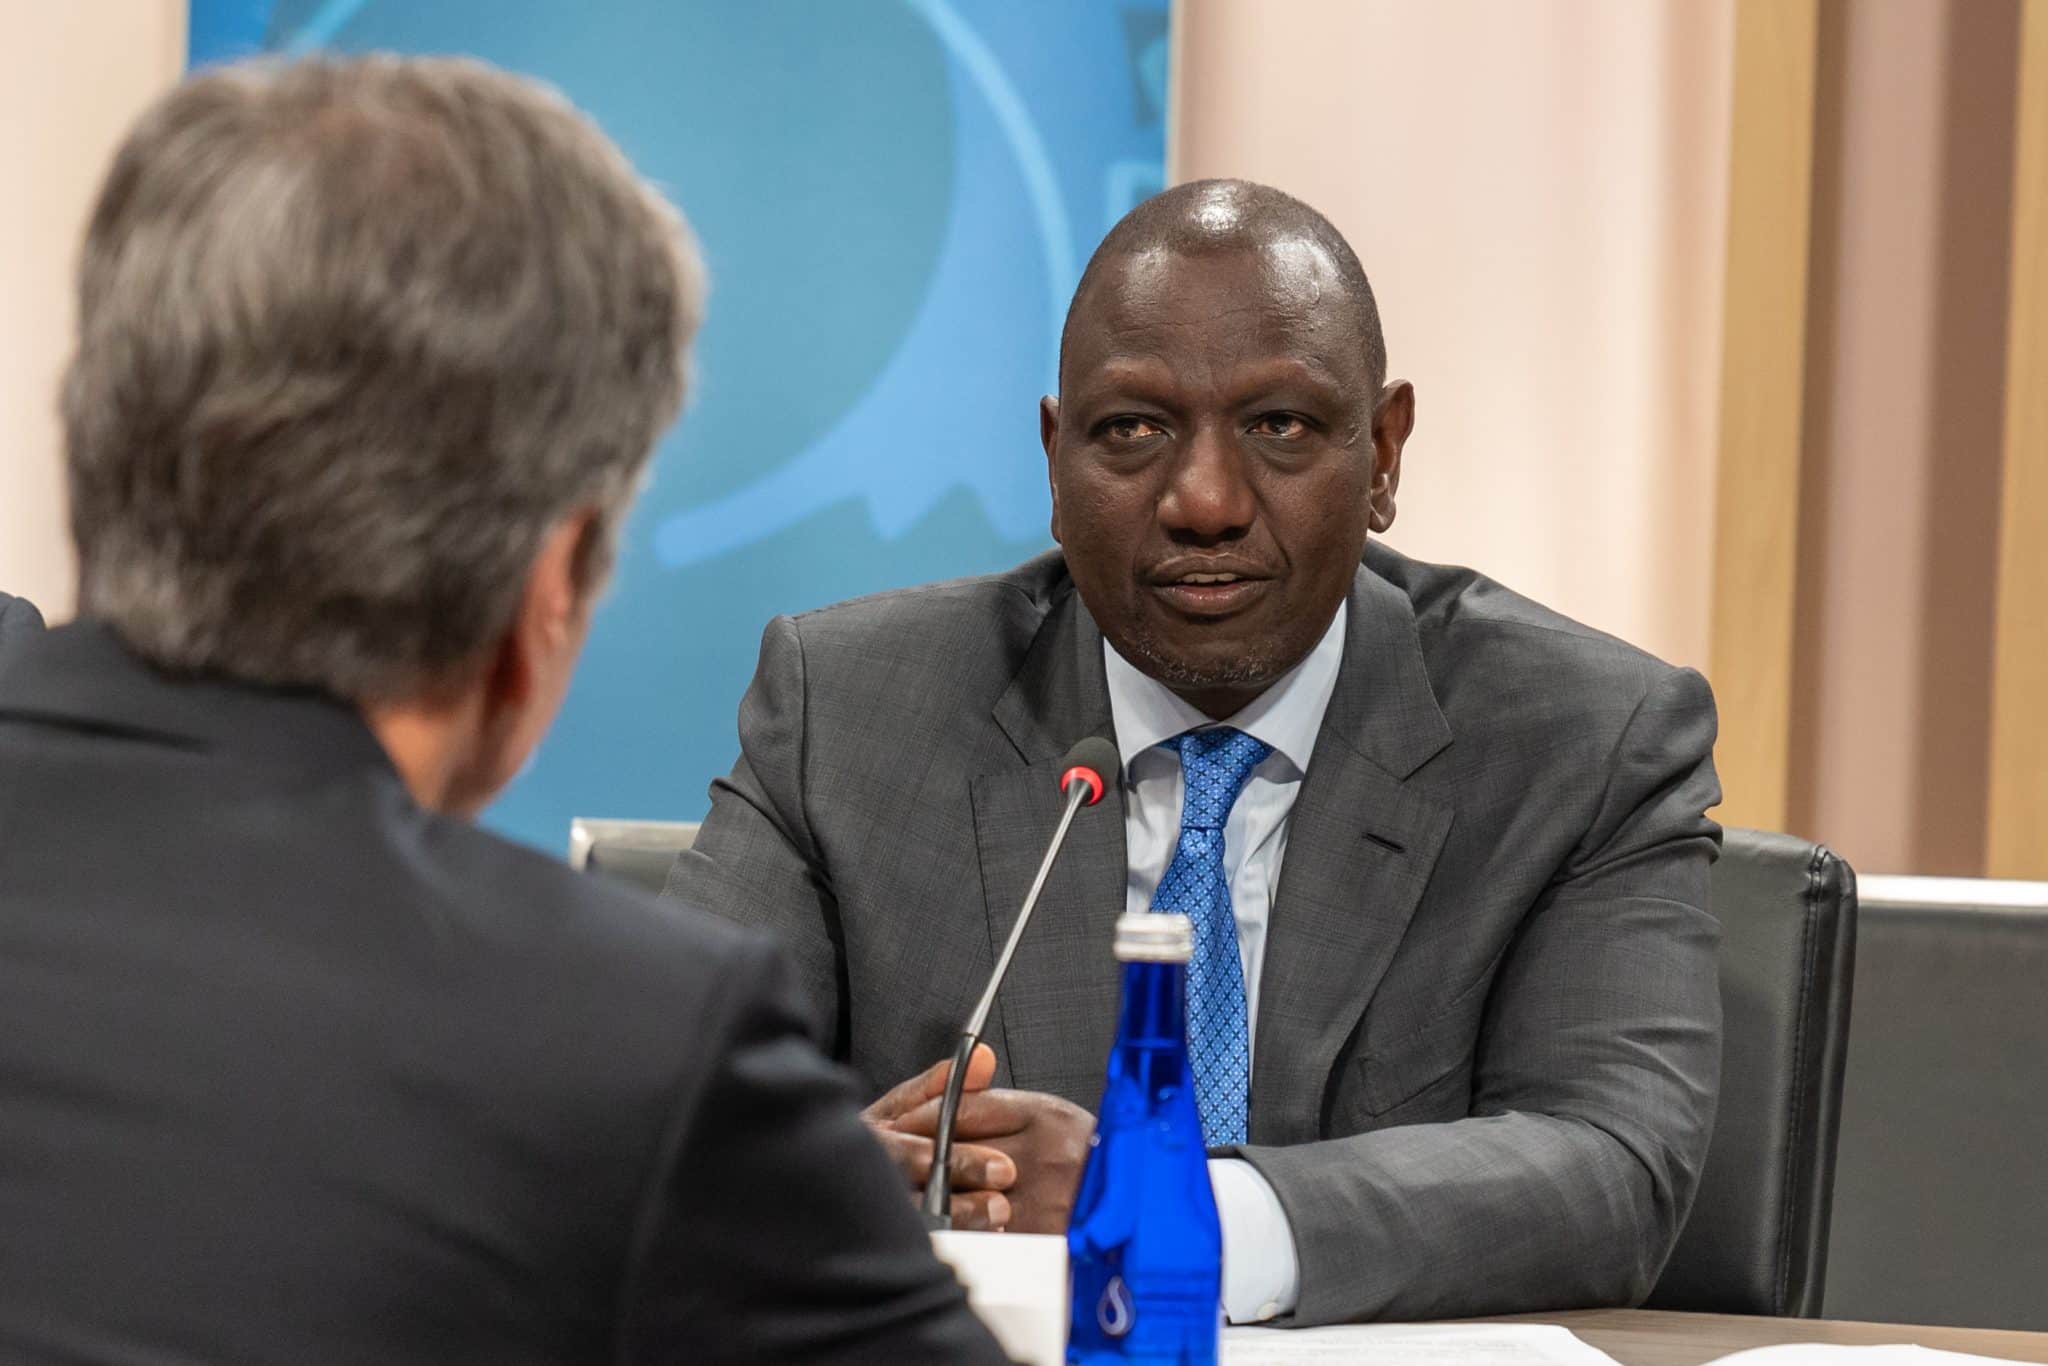 Secretary of State Antony J. Blinken meets with Kenyan President William Ruto on the margins of the U.S.-Africa Leaders Summit in Washington, D.C., on December 15, 2022. [State Department photo by Ron Przysucha